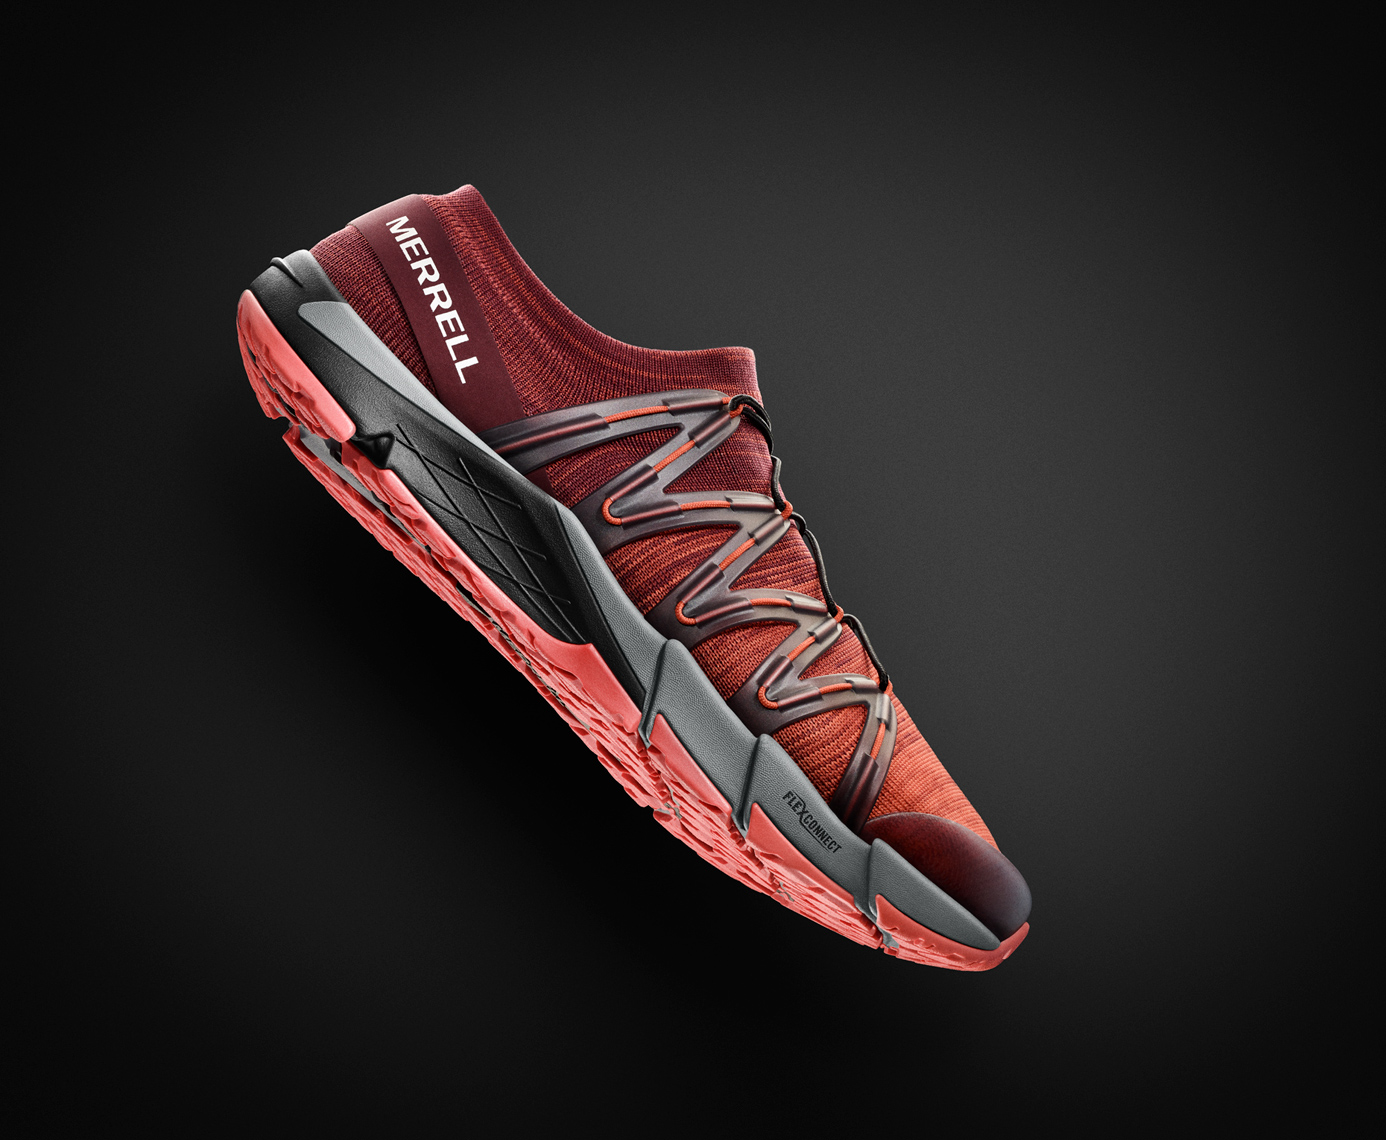 Merrell Footwear Image Retouching and Environment Creation